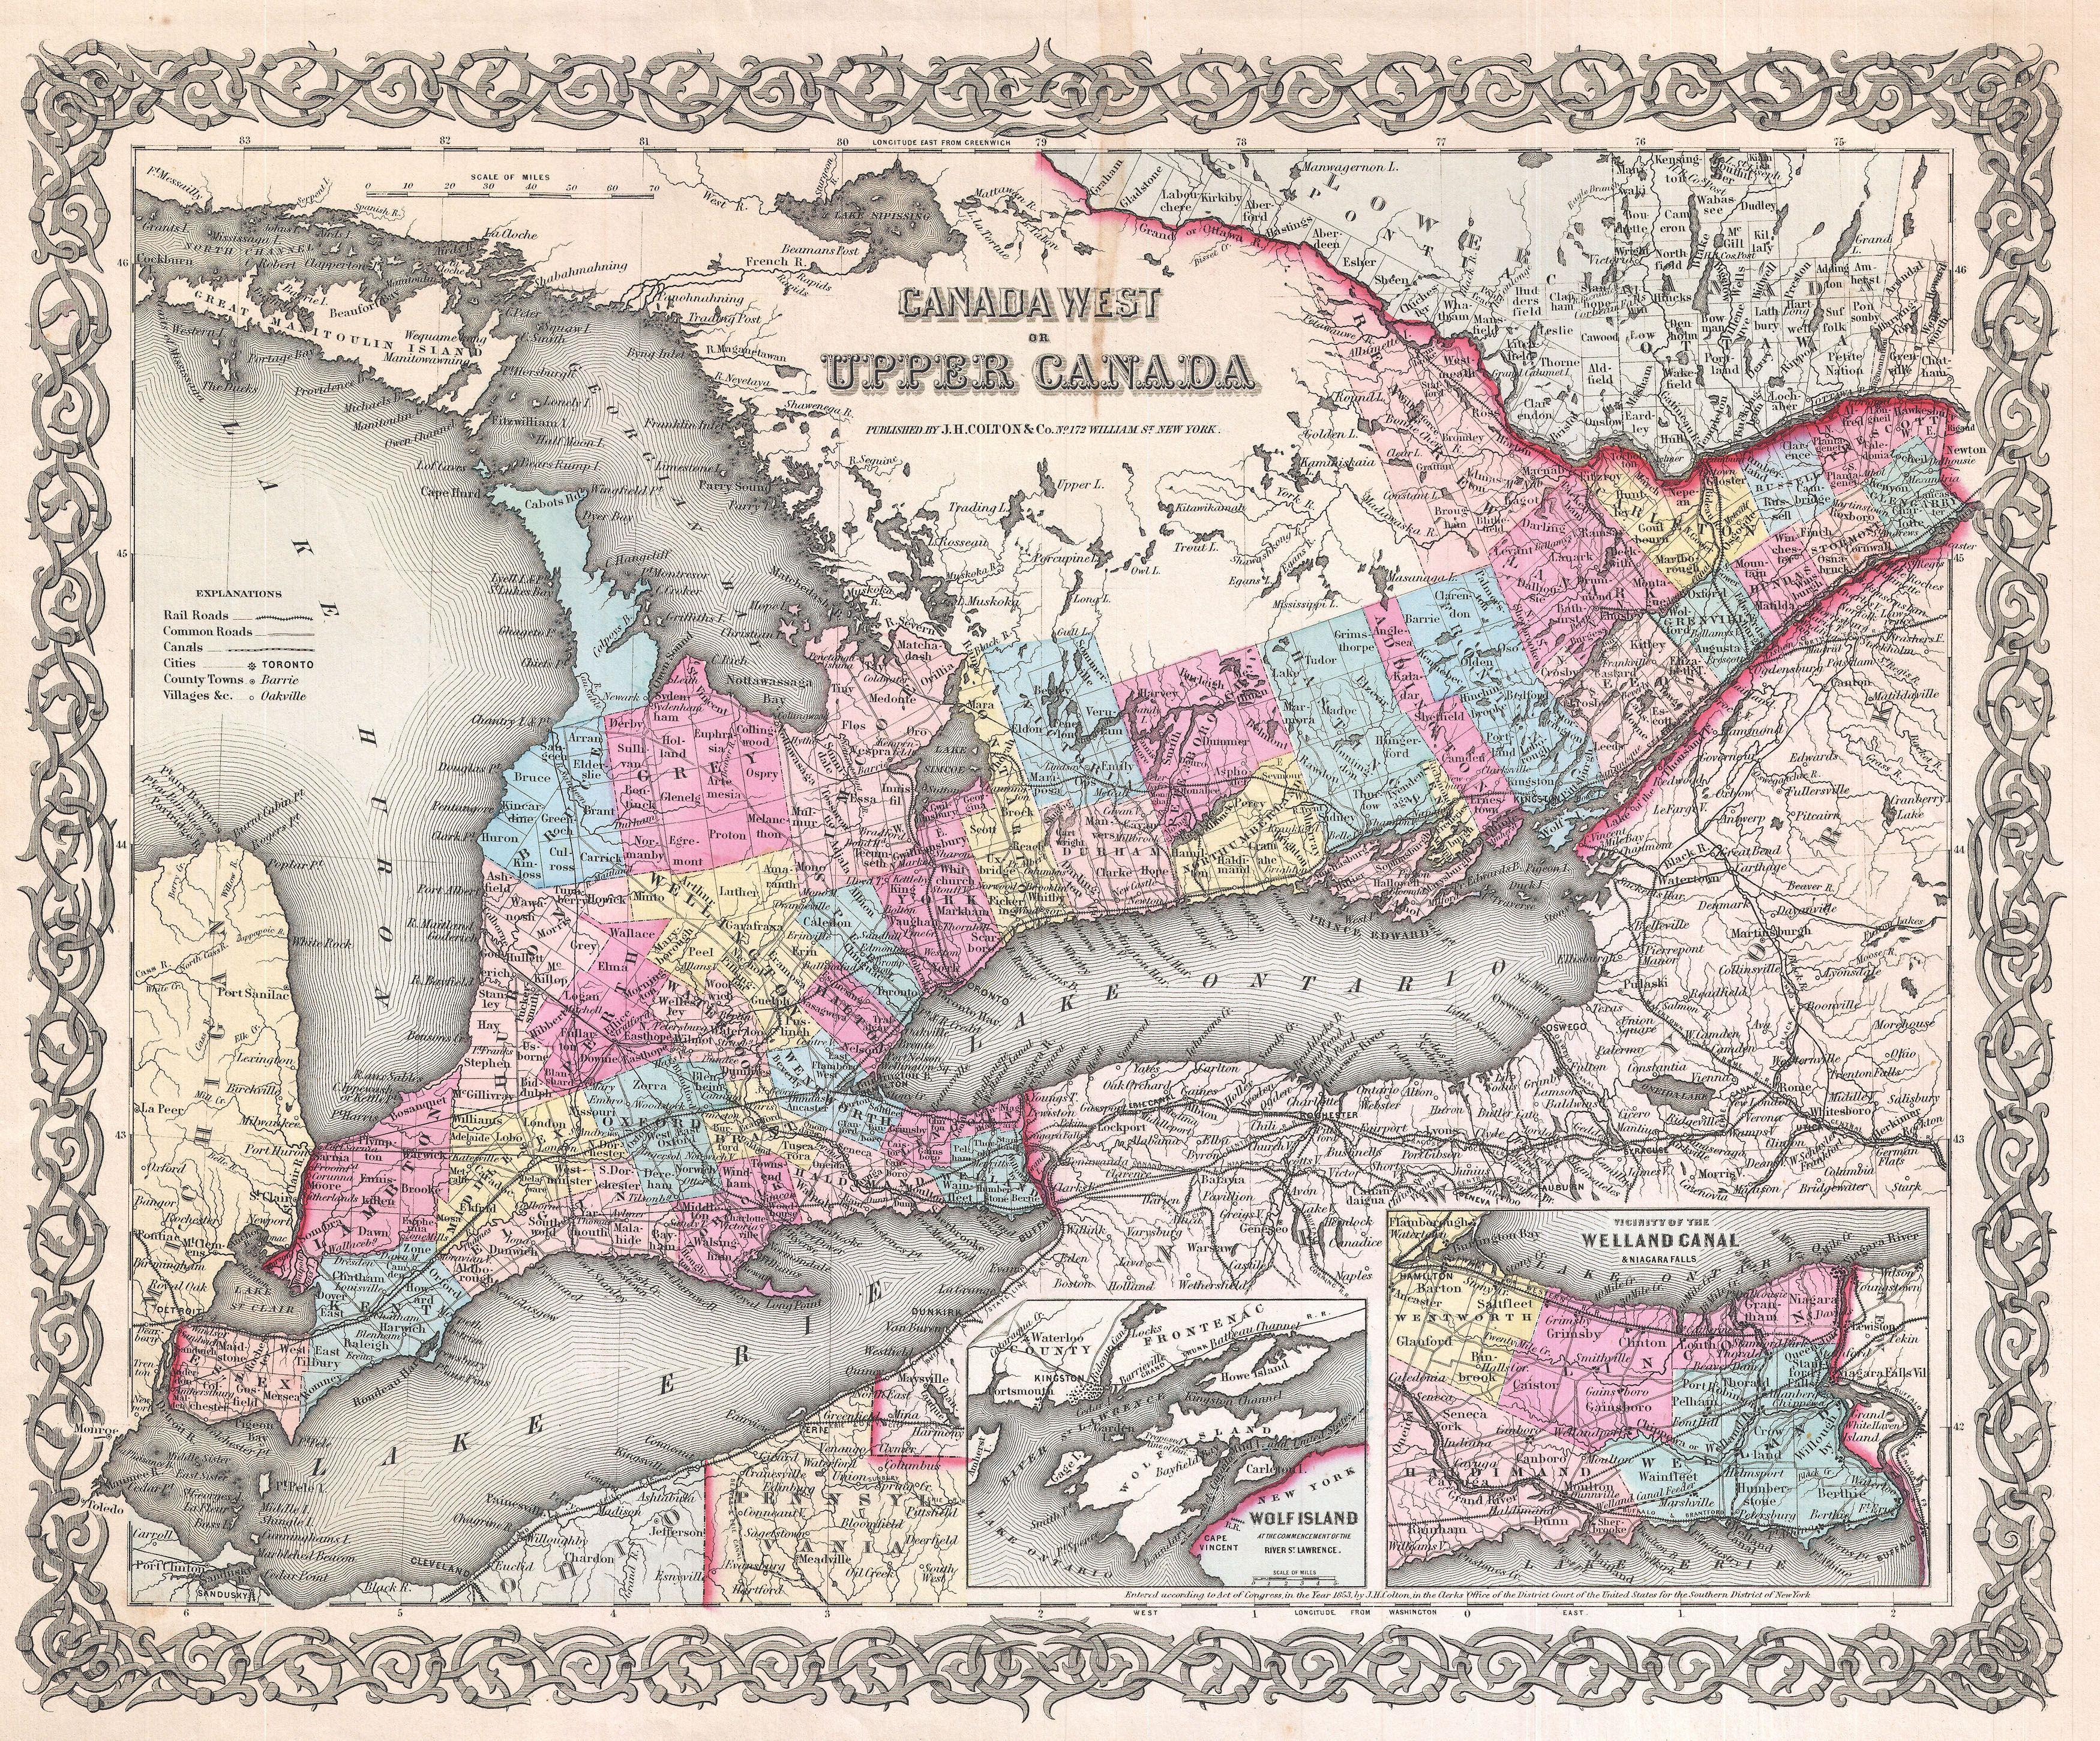 Colton map of Upper Canada (Later Ontario), 1855